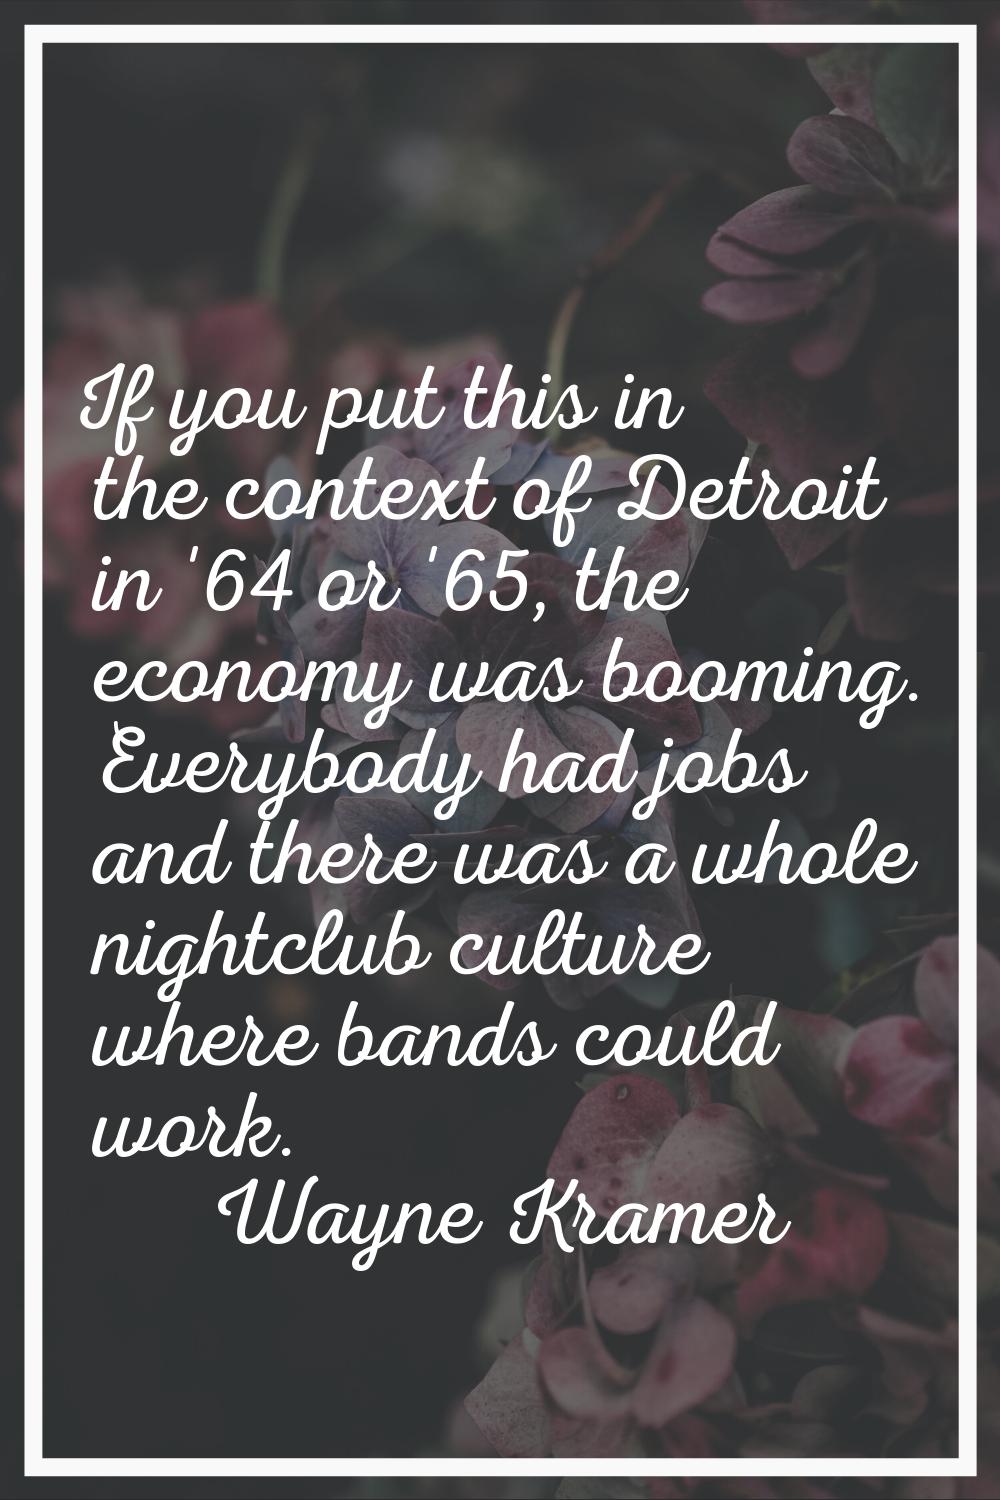 If you put this in the context of Detroit in '64 or '65, the economy was booming. Everybody had job